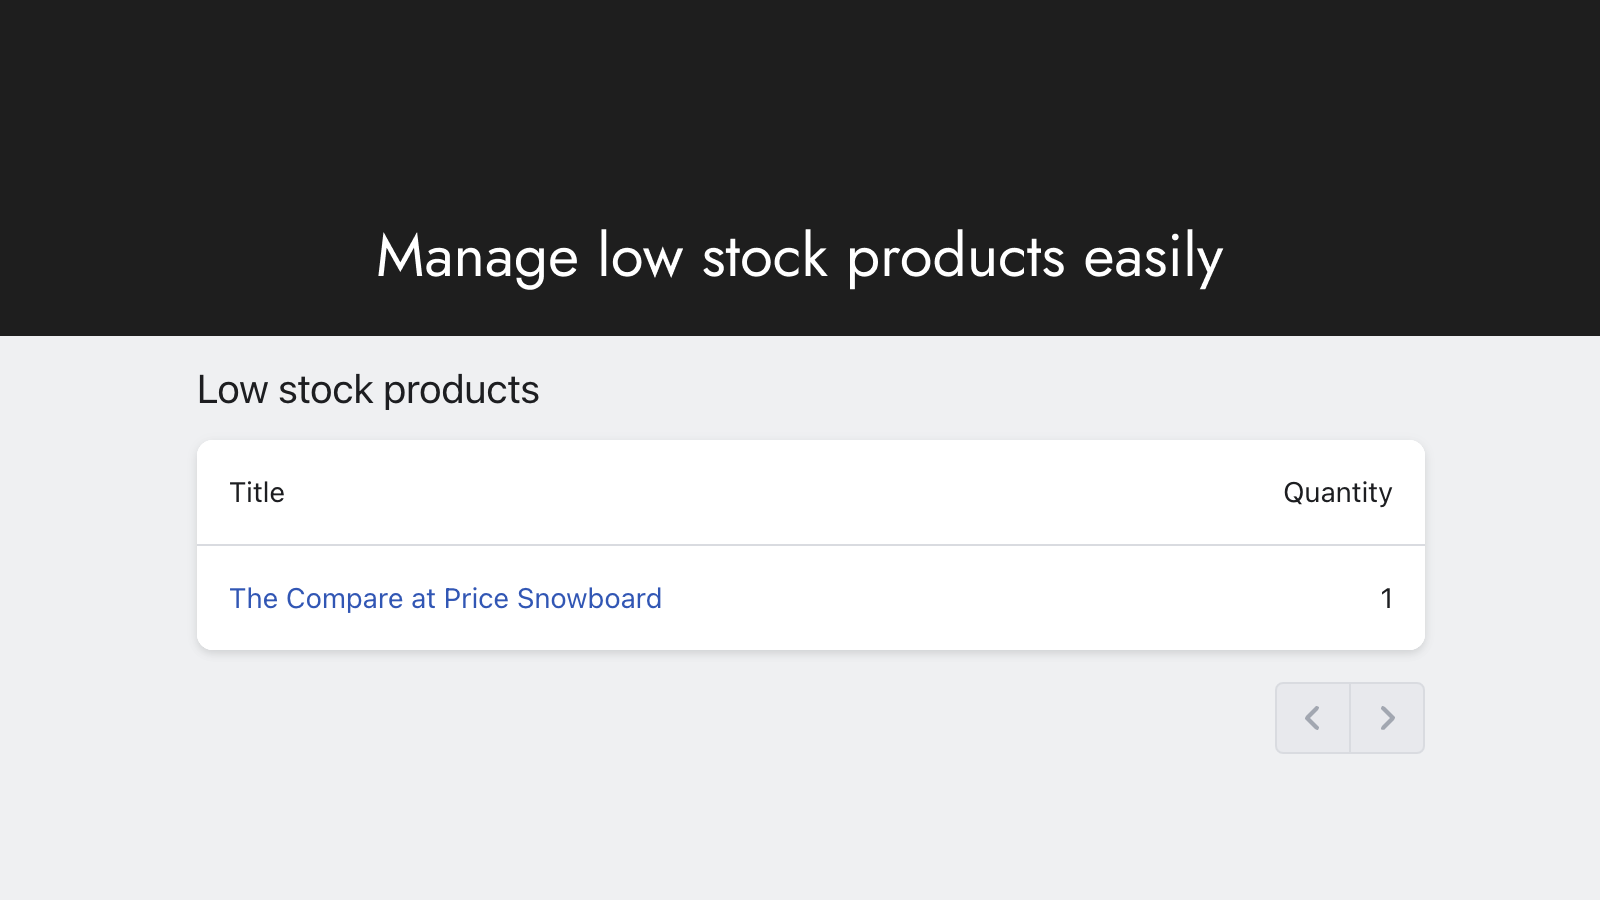 Manage low stock's products easily